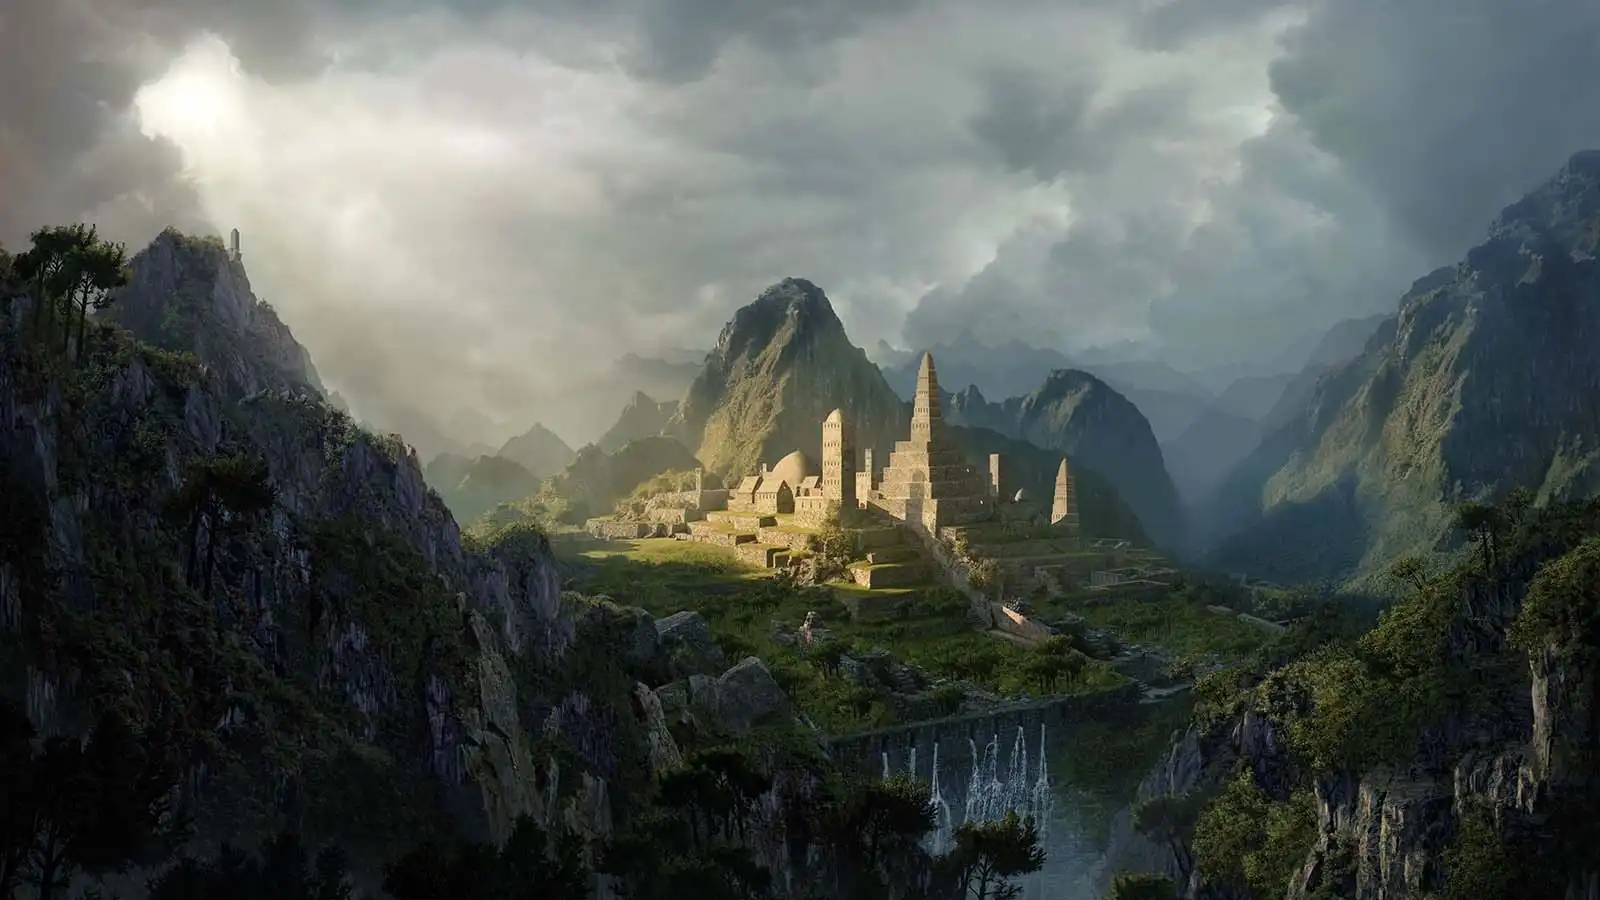 Matte Painting in Photoshop